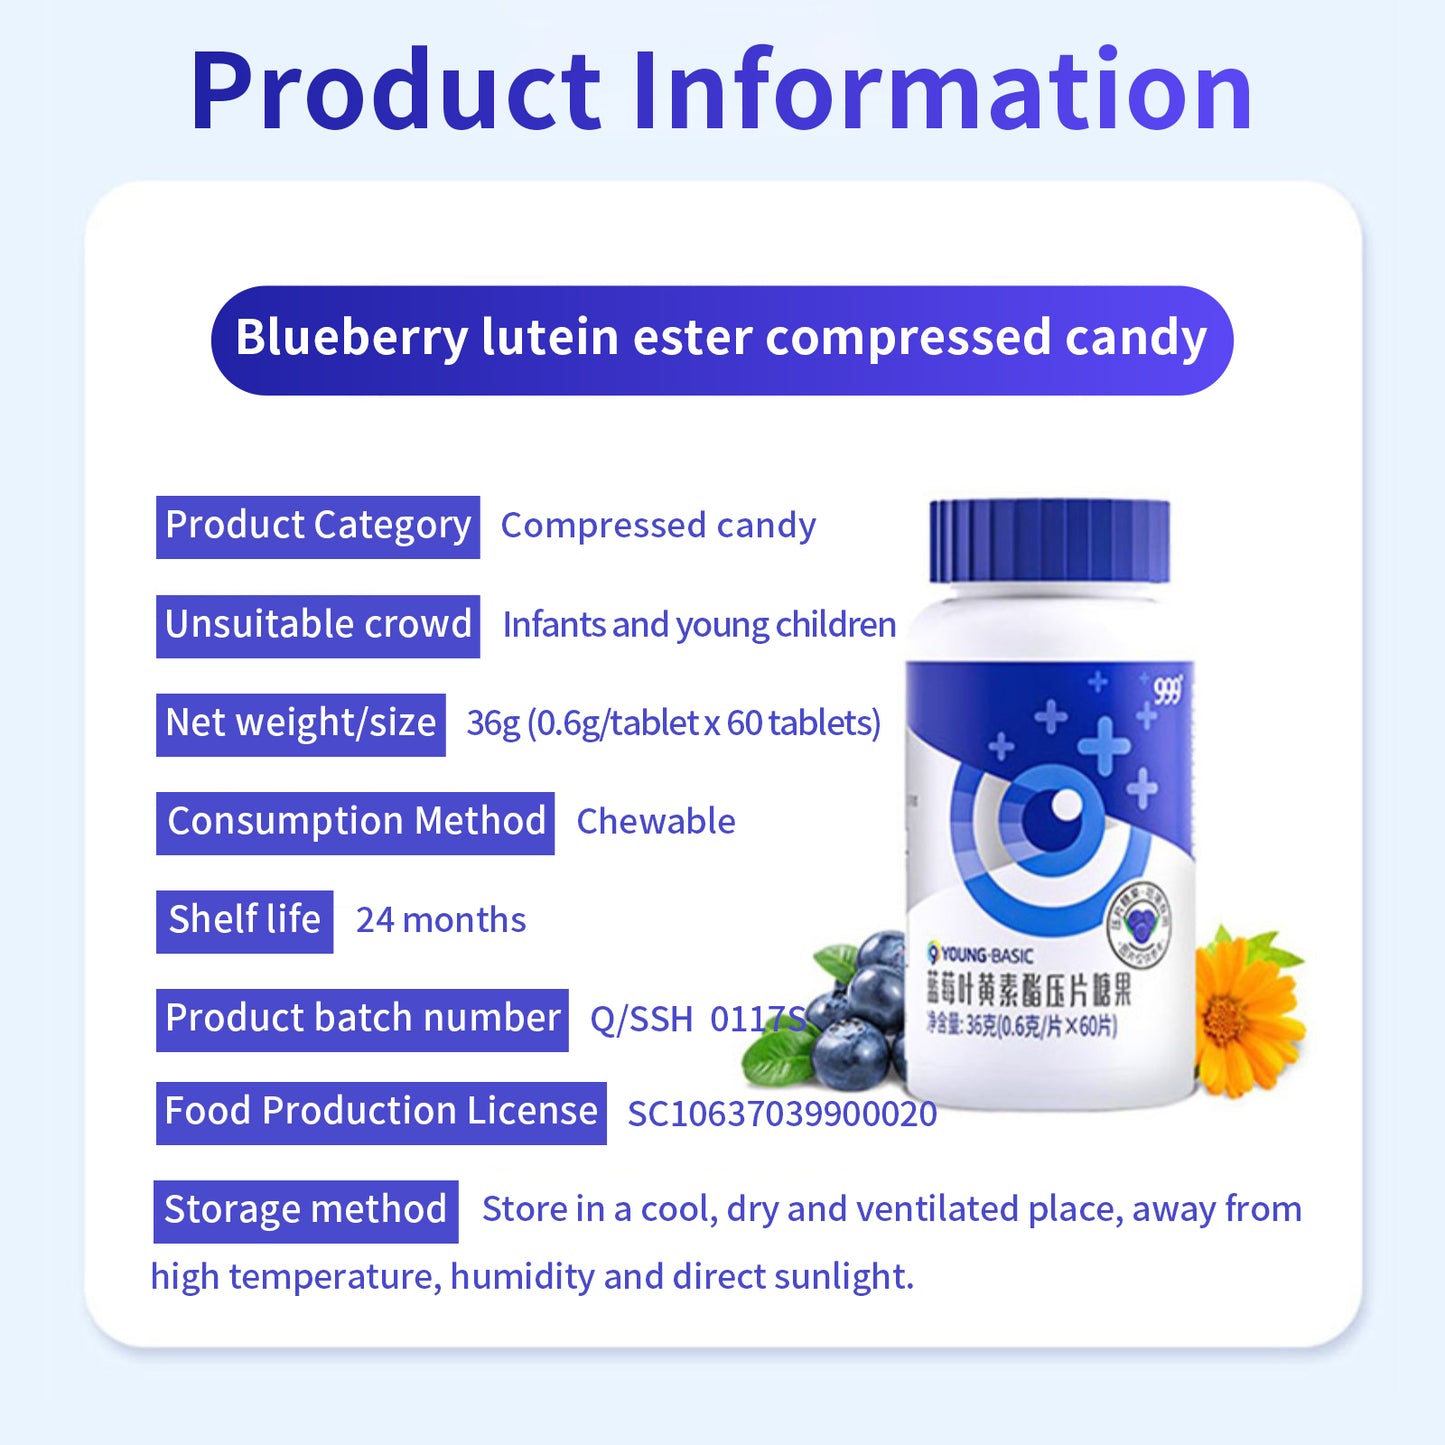 999 Young-BASIC Blueberry Lutein Esters Chewable Tablets- Natural Nutrition Supplement, Antioxidant, Eye Health, 60 Tablets,protection adult children eye,Dry eyes,fatigue,children's myopia protection,relieve eye strain,health supplements - 999 Medical